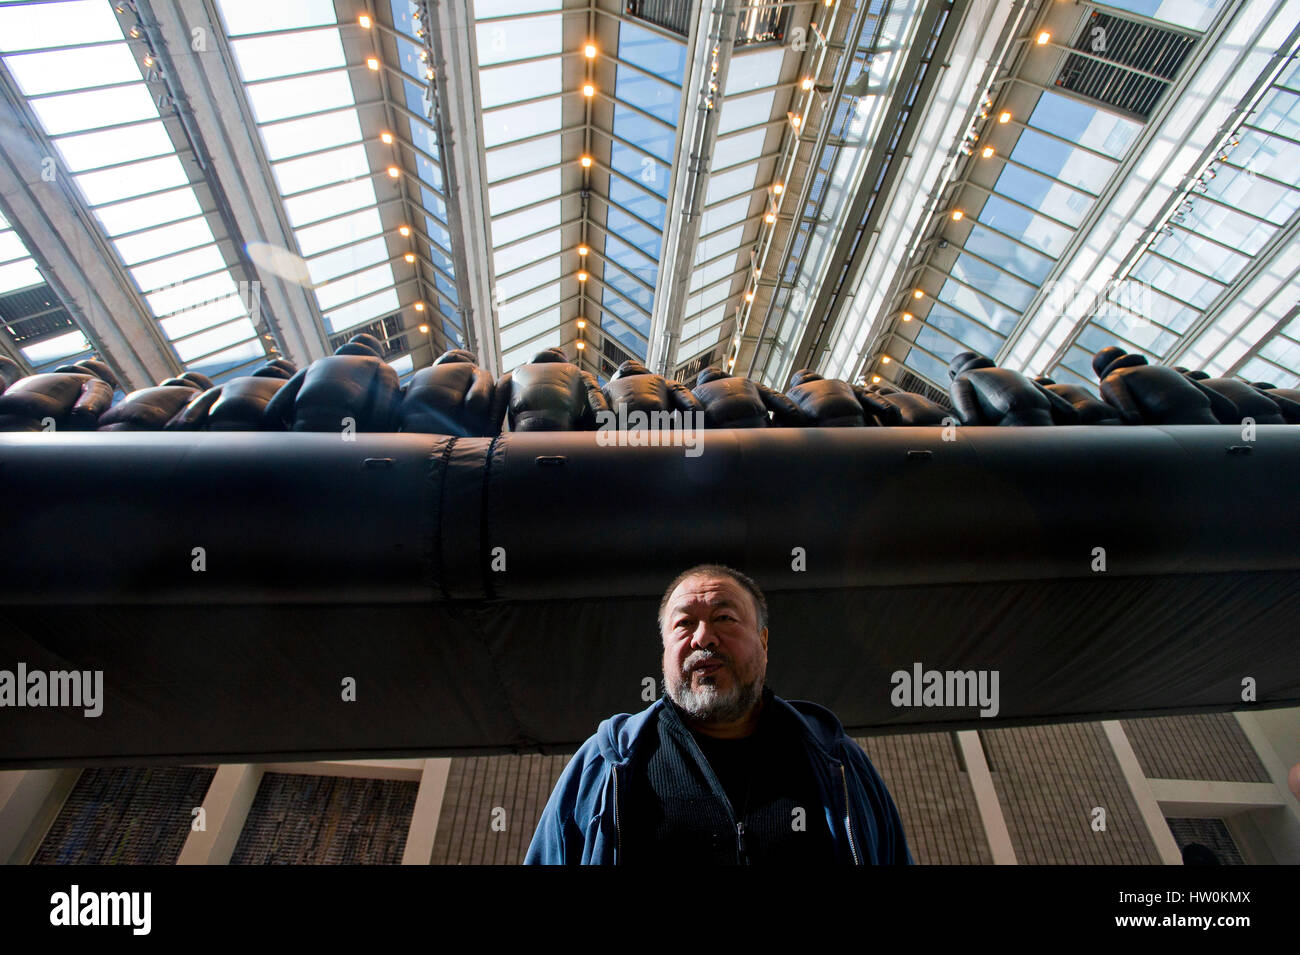 Prague, Czech Republic. 16th Mar, 2017. The latest work by Chinese conceptual artist Ai Weiwei, 59, pictured, which will be presented to the public at the National Gallery (NG) in Prague, Czech Republic, March 16, 2017, shows refugees perceived by the Western world as an inhuman mass without their own identity, names and life stories. Credit: CTK/Alamy Live News Stock Photo